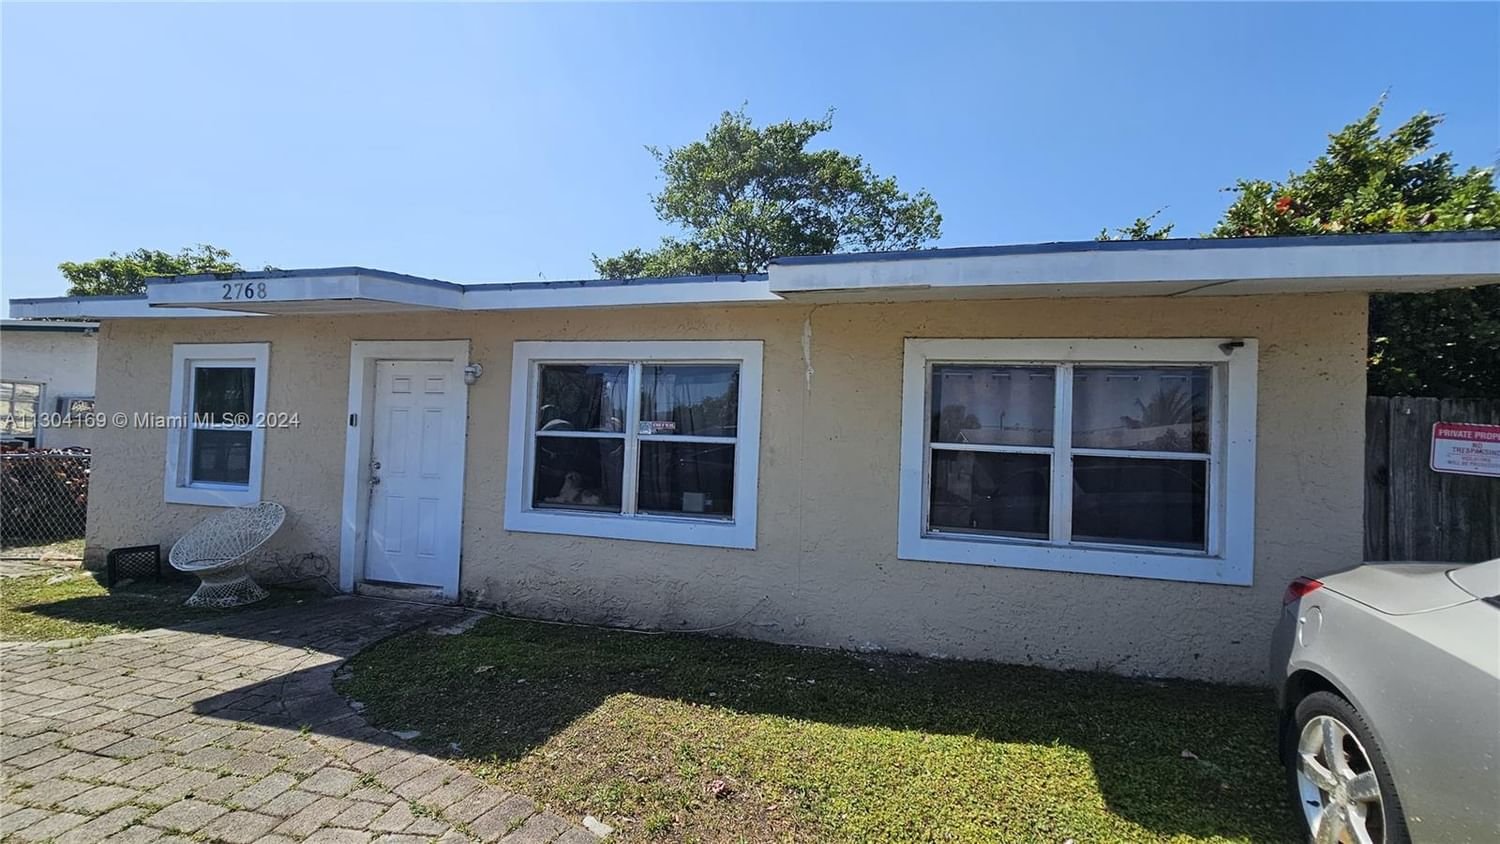 Real estate property located at 2768 5th St, Broward County, 33-48-42 E 50 OF W 100 OF, Pompano Beach, FL